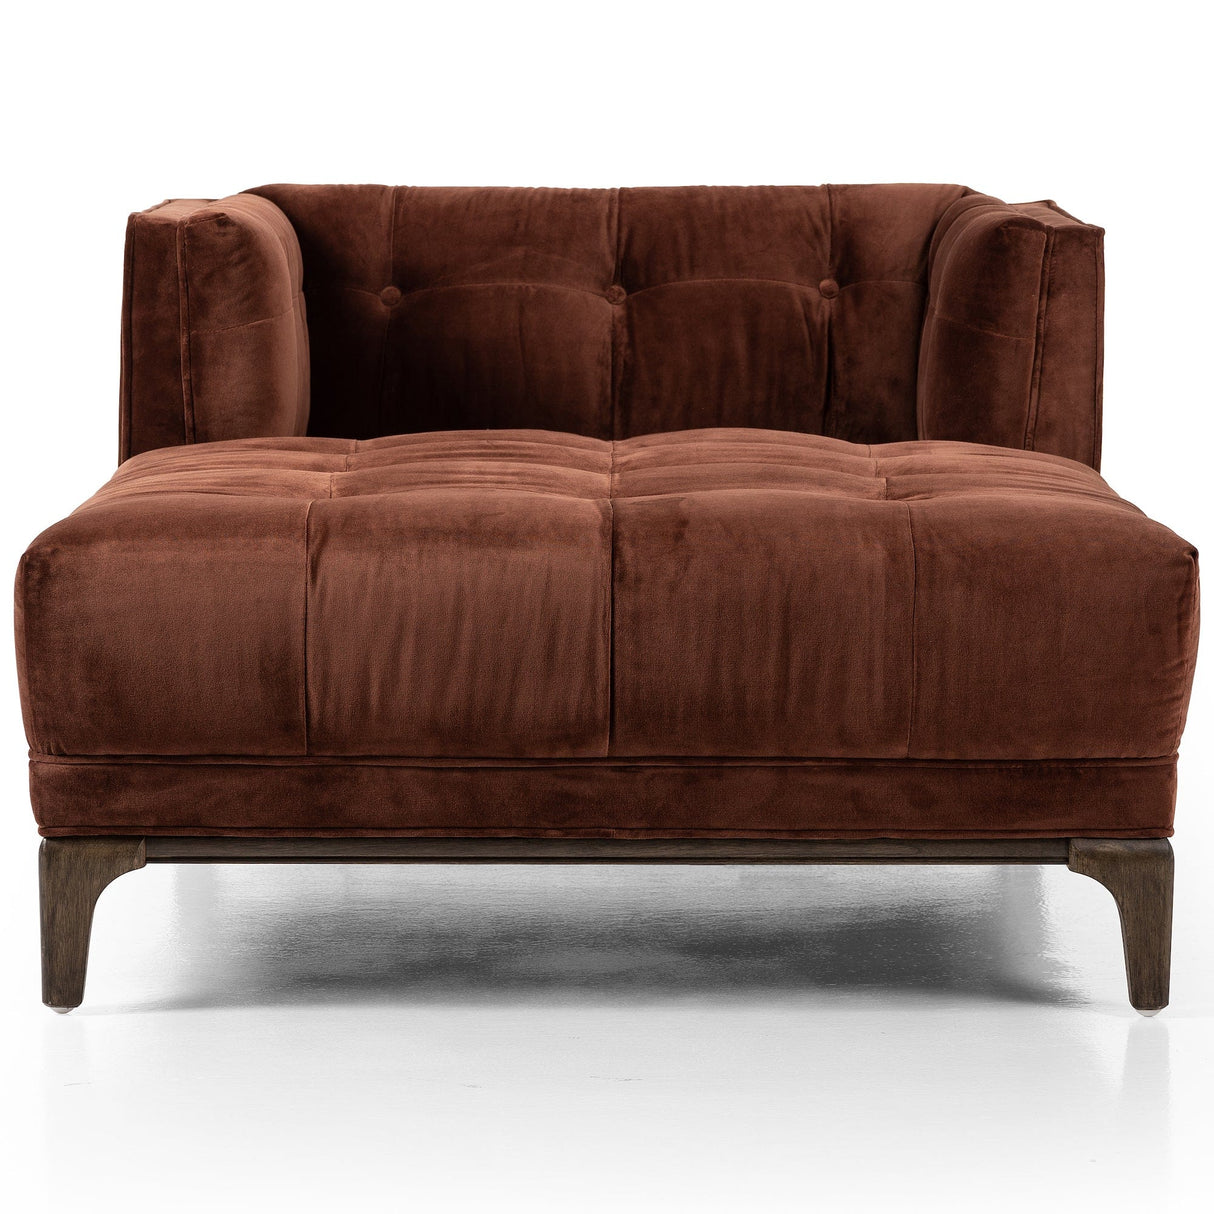 Four Hands Dylan Chaise Lounge Sofas four-hands-105997-011 801542251208